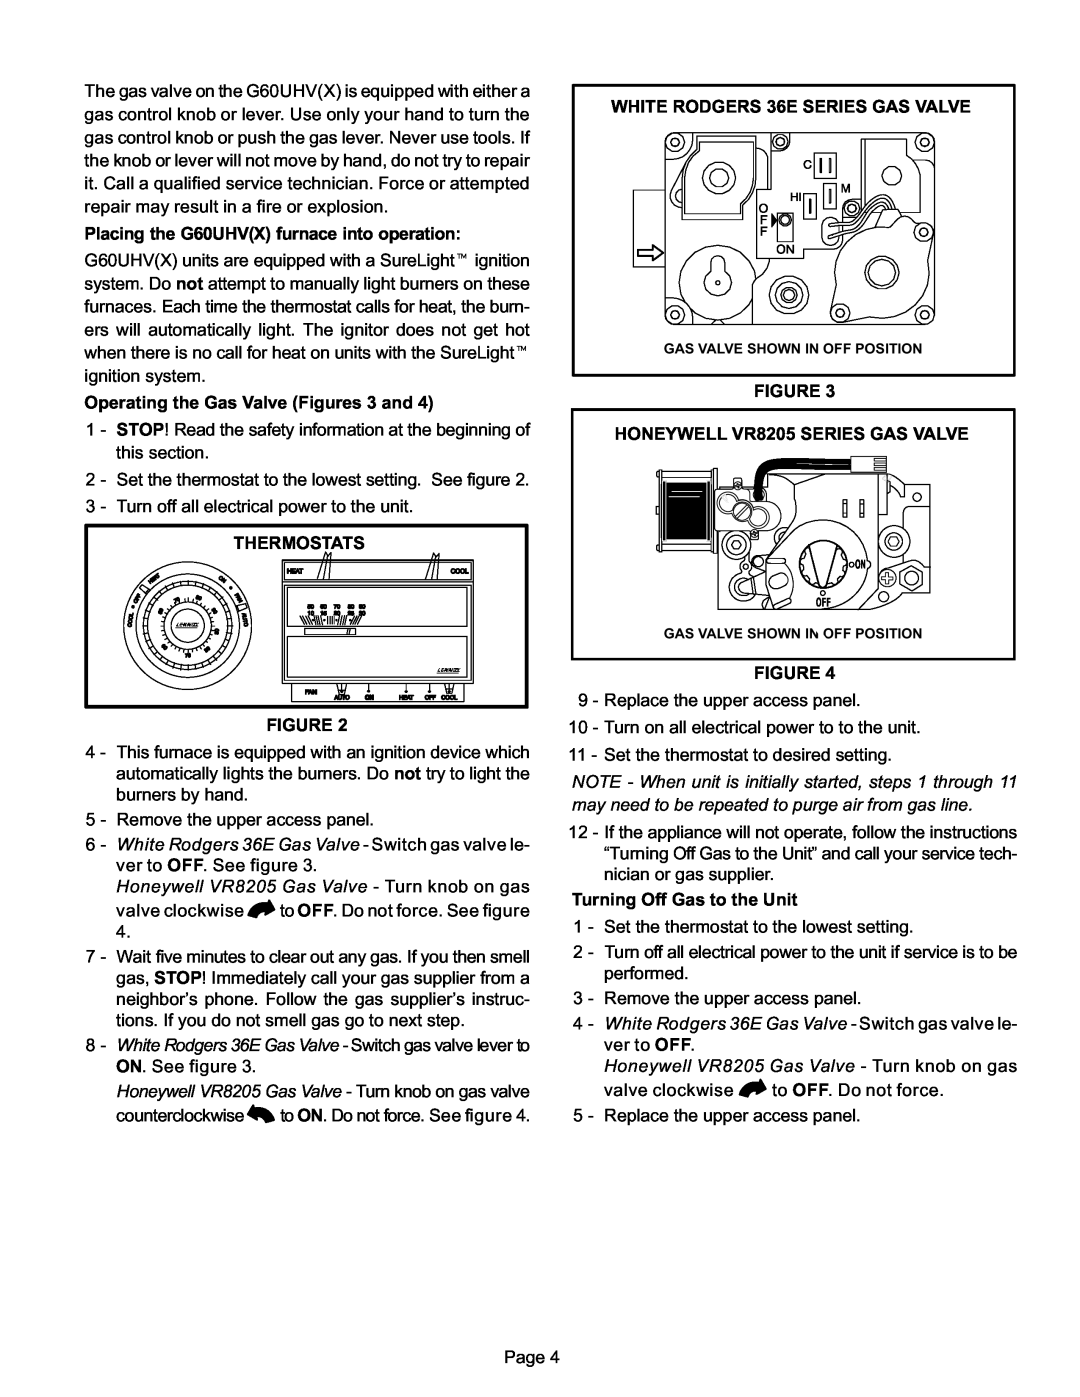 Lennox Hearth G60UHV(X) manual Operating the Gas Valve Figures 3 and 